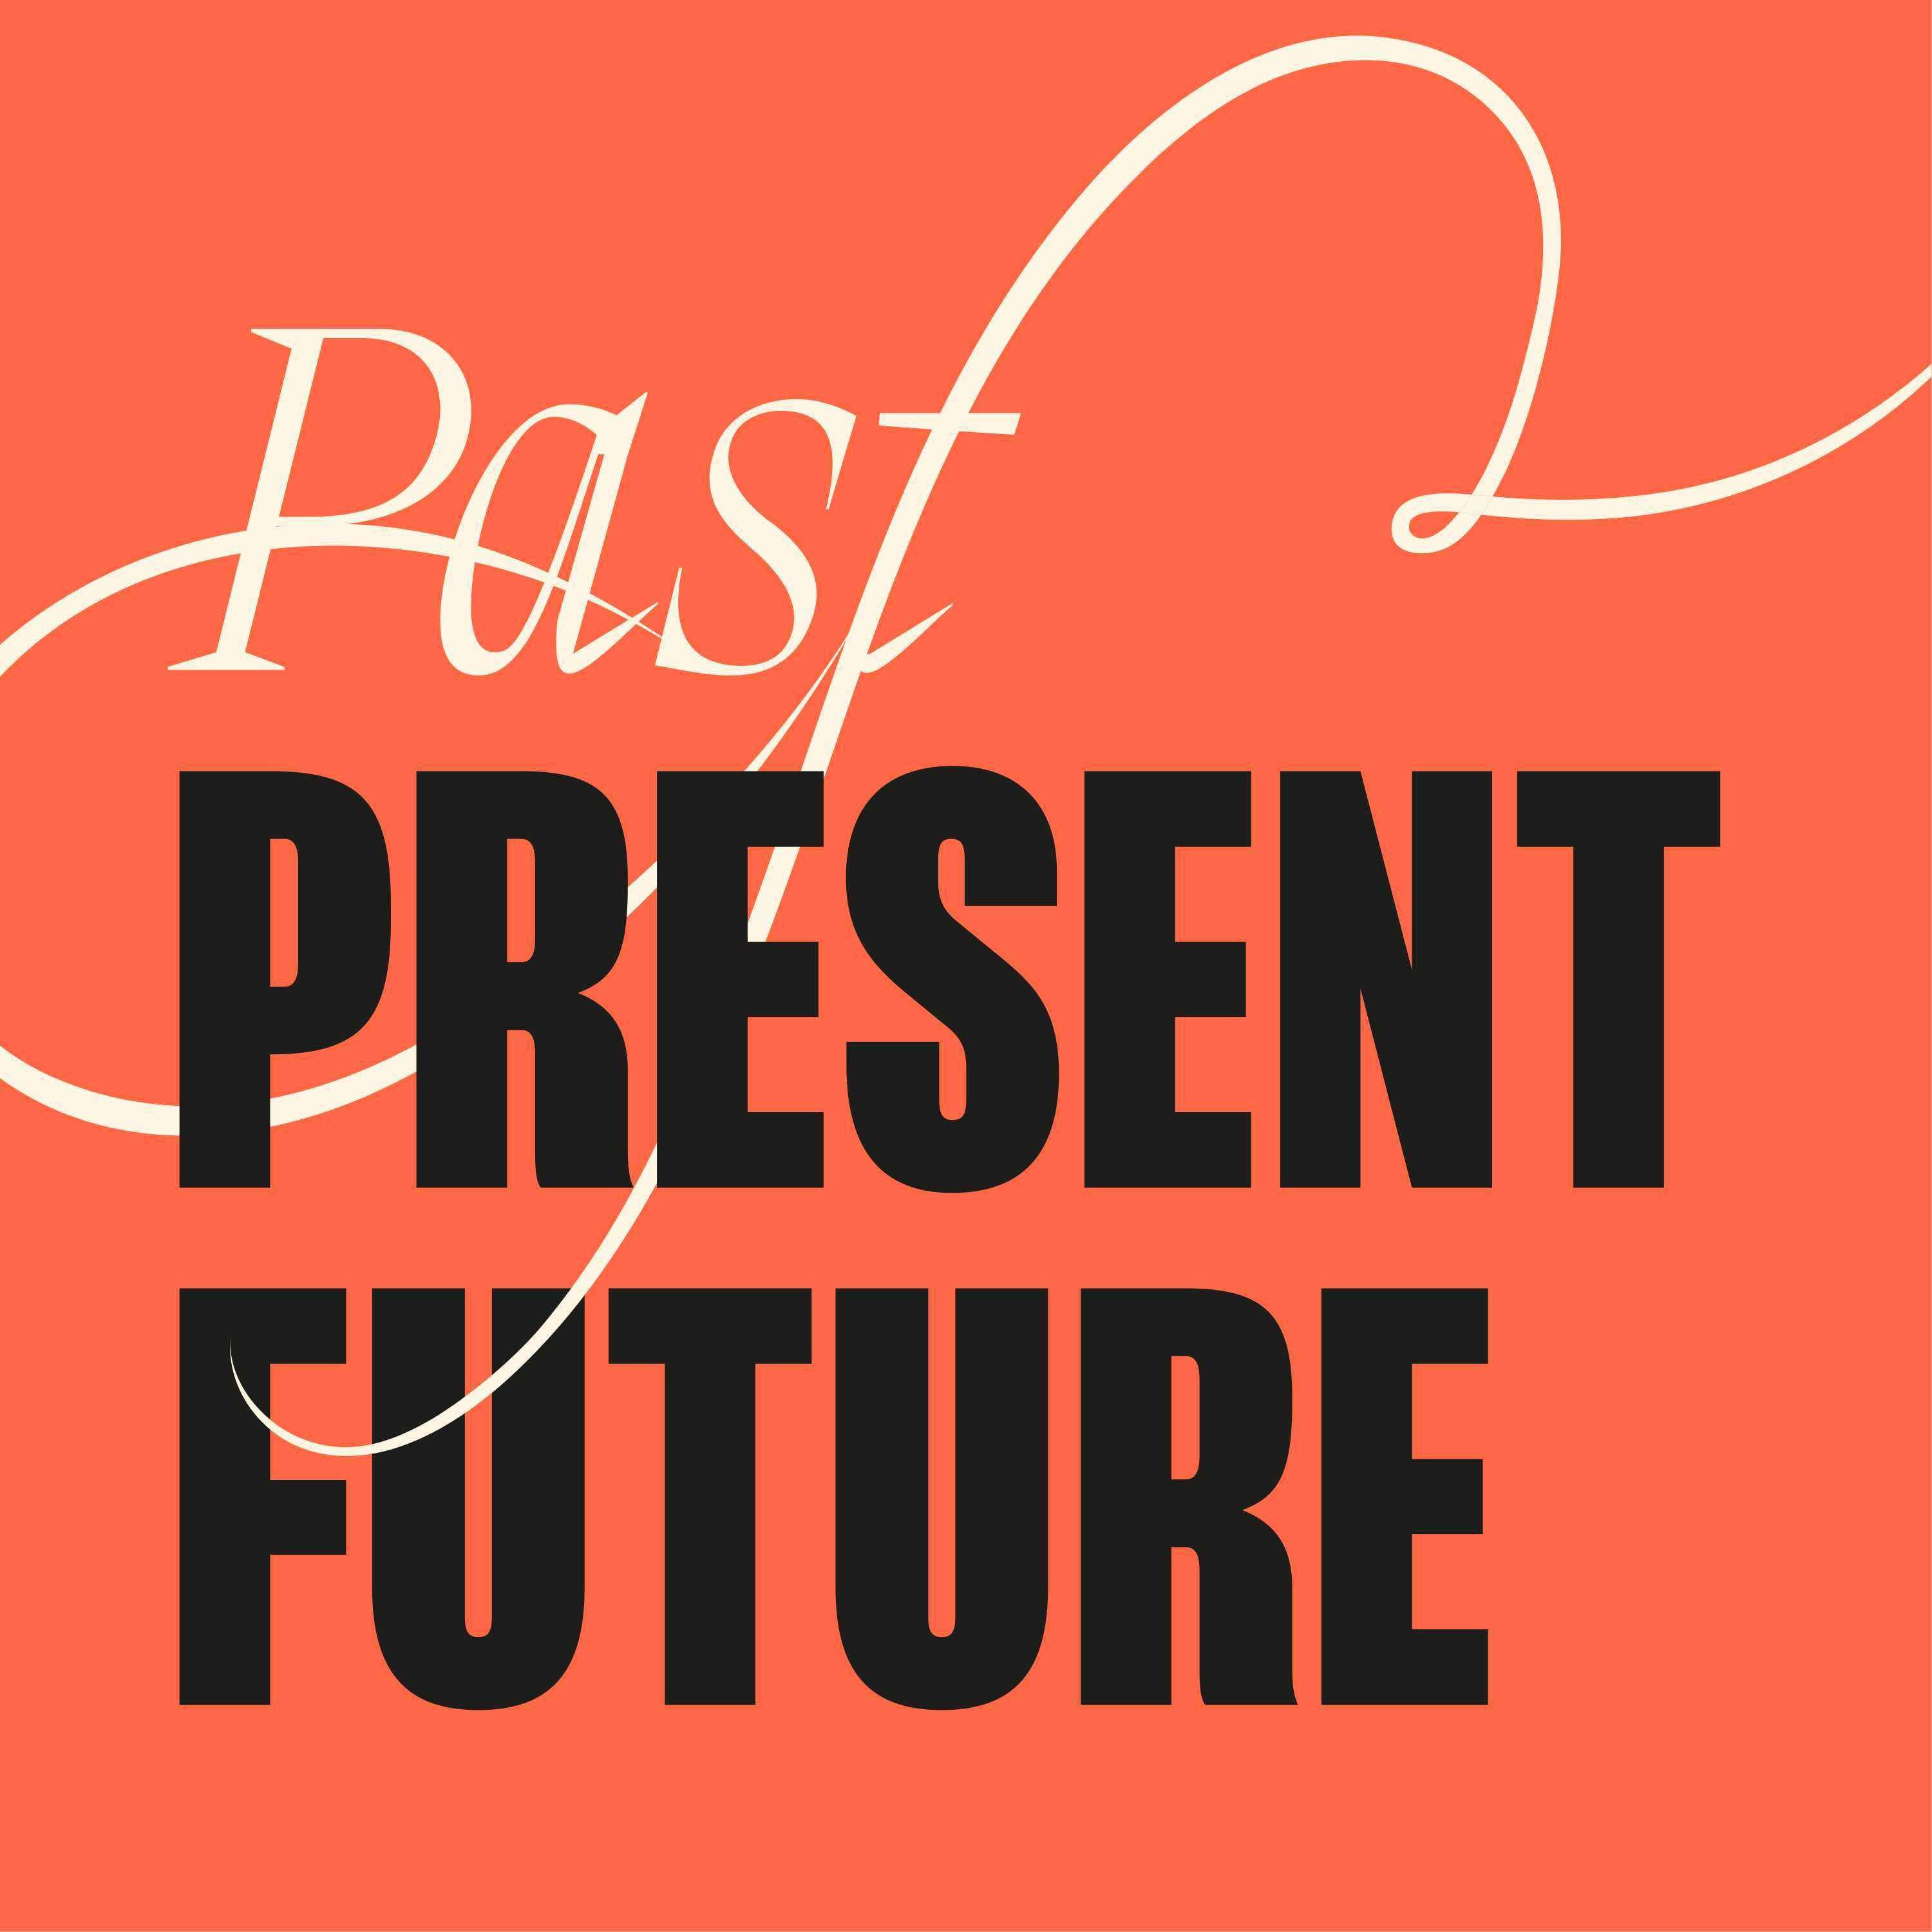 cover art for Introducing Past Present Future